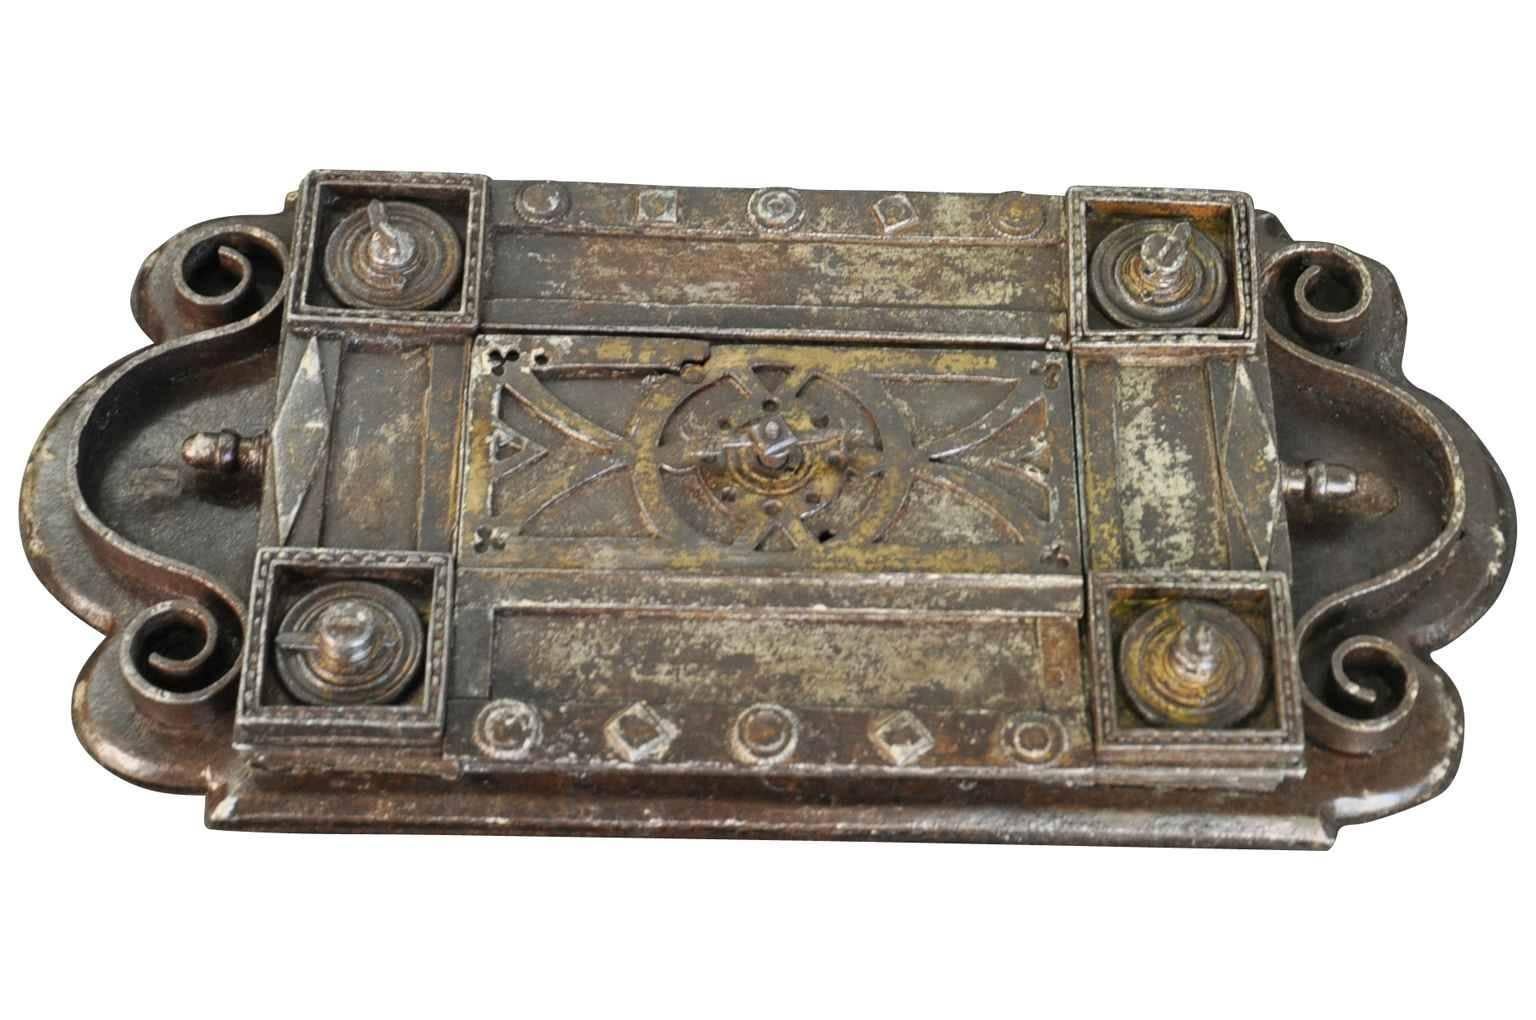 Exceptional Early 18th Century Italian Coffre or Strong Trunk 3